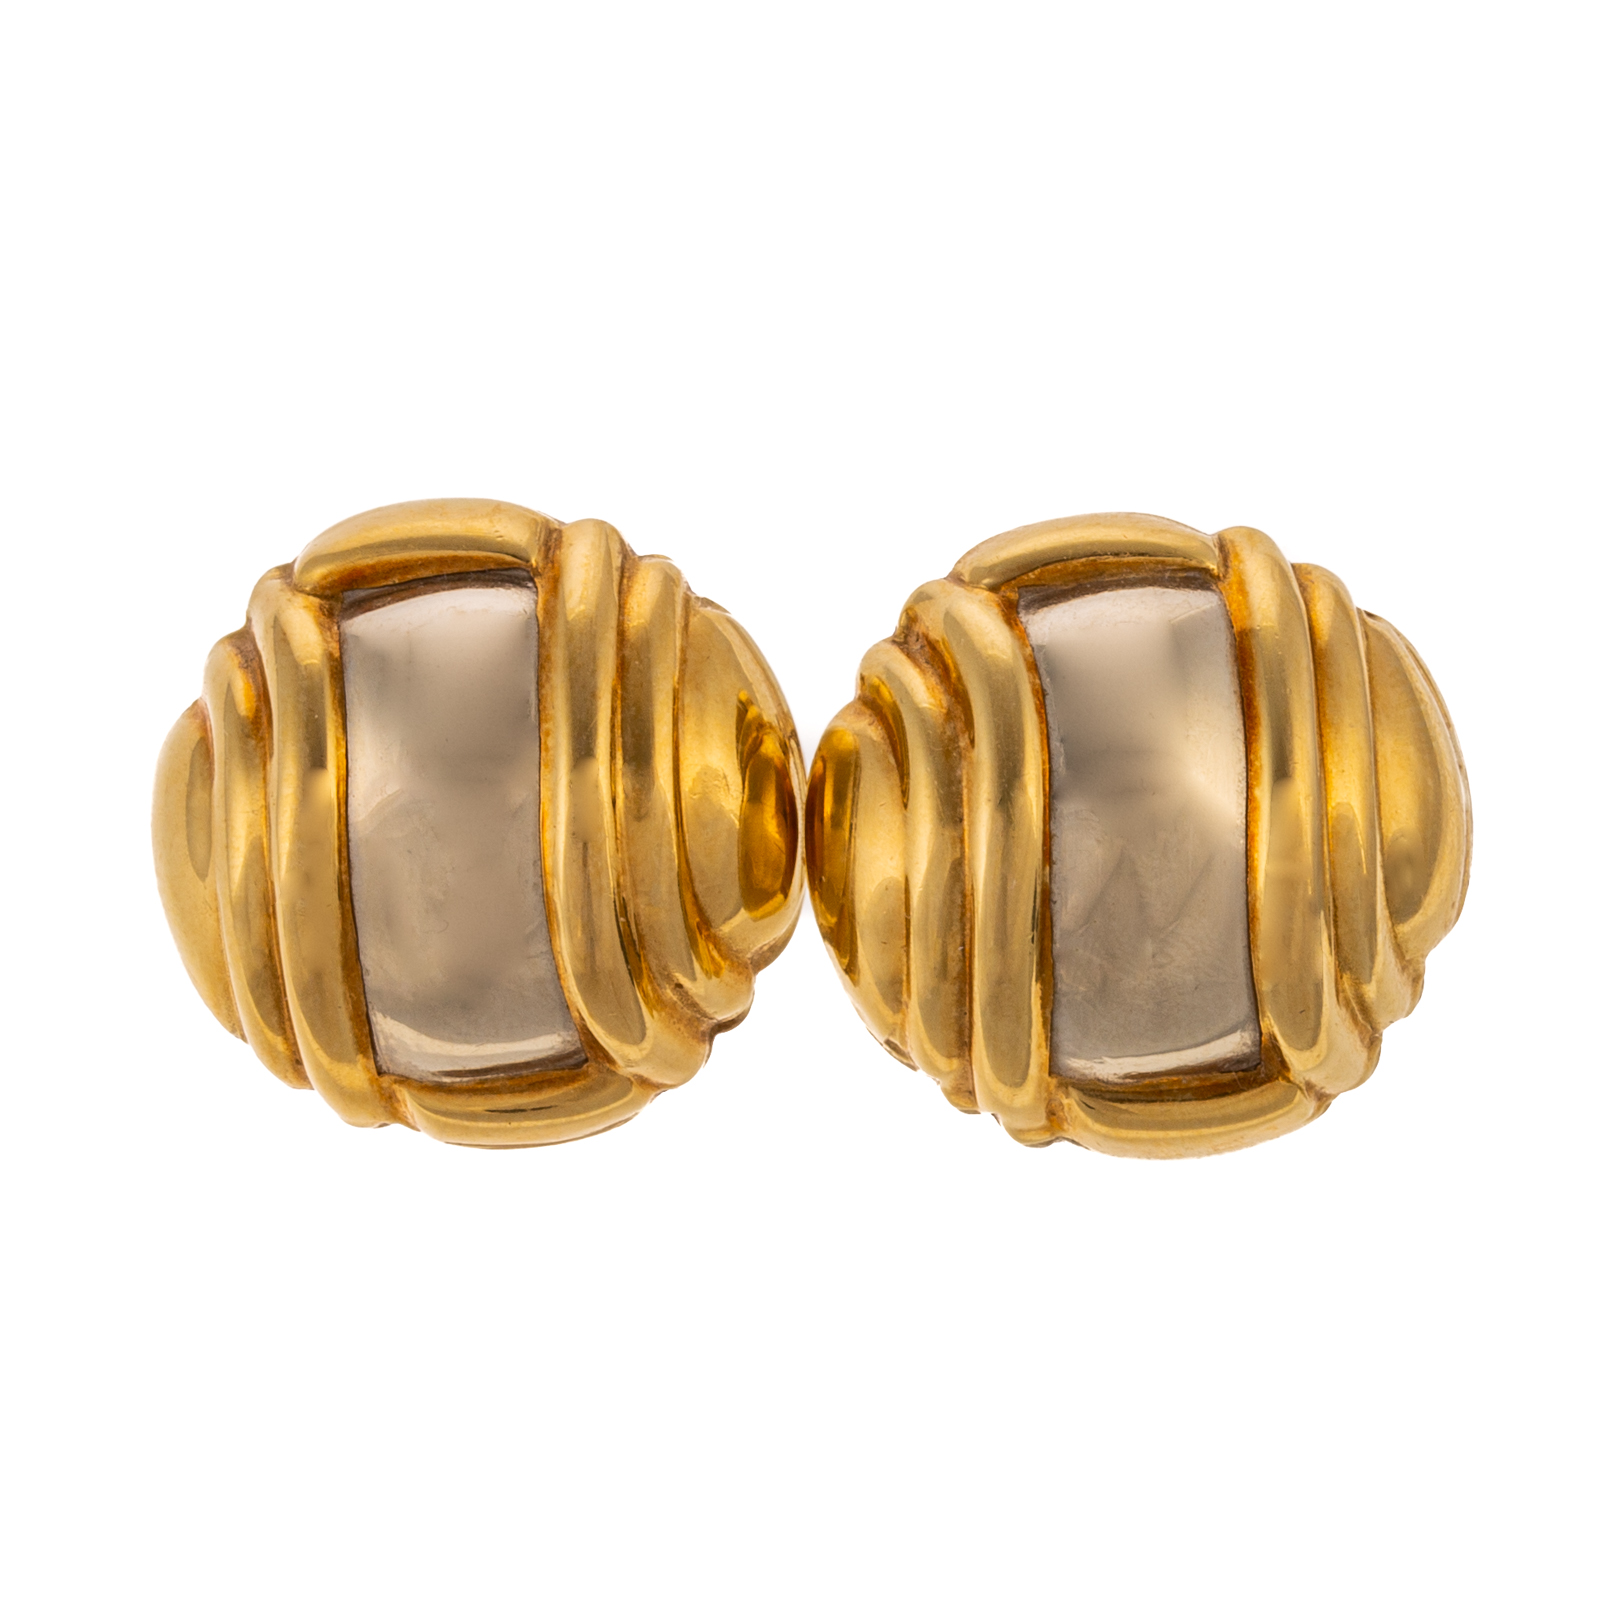 A PAIR OF TWO TONE 18K BUTTON EARRINGS 33857a